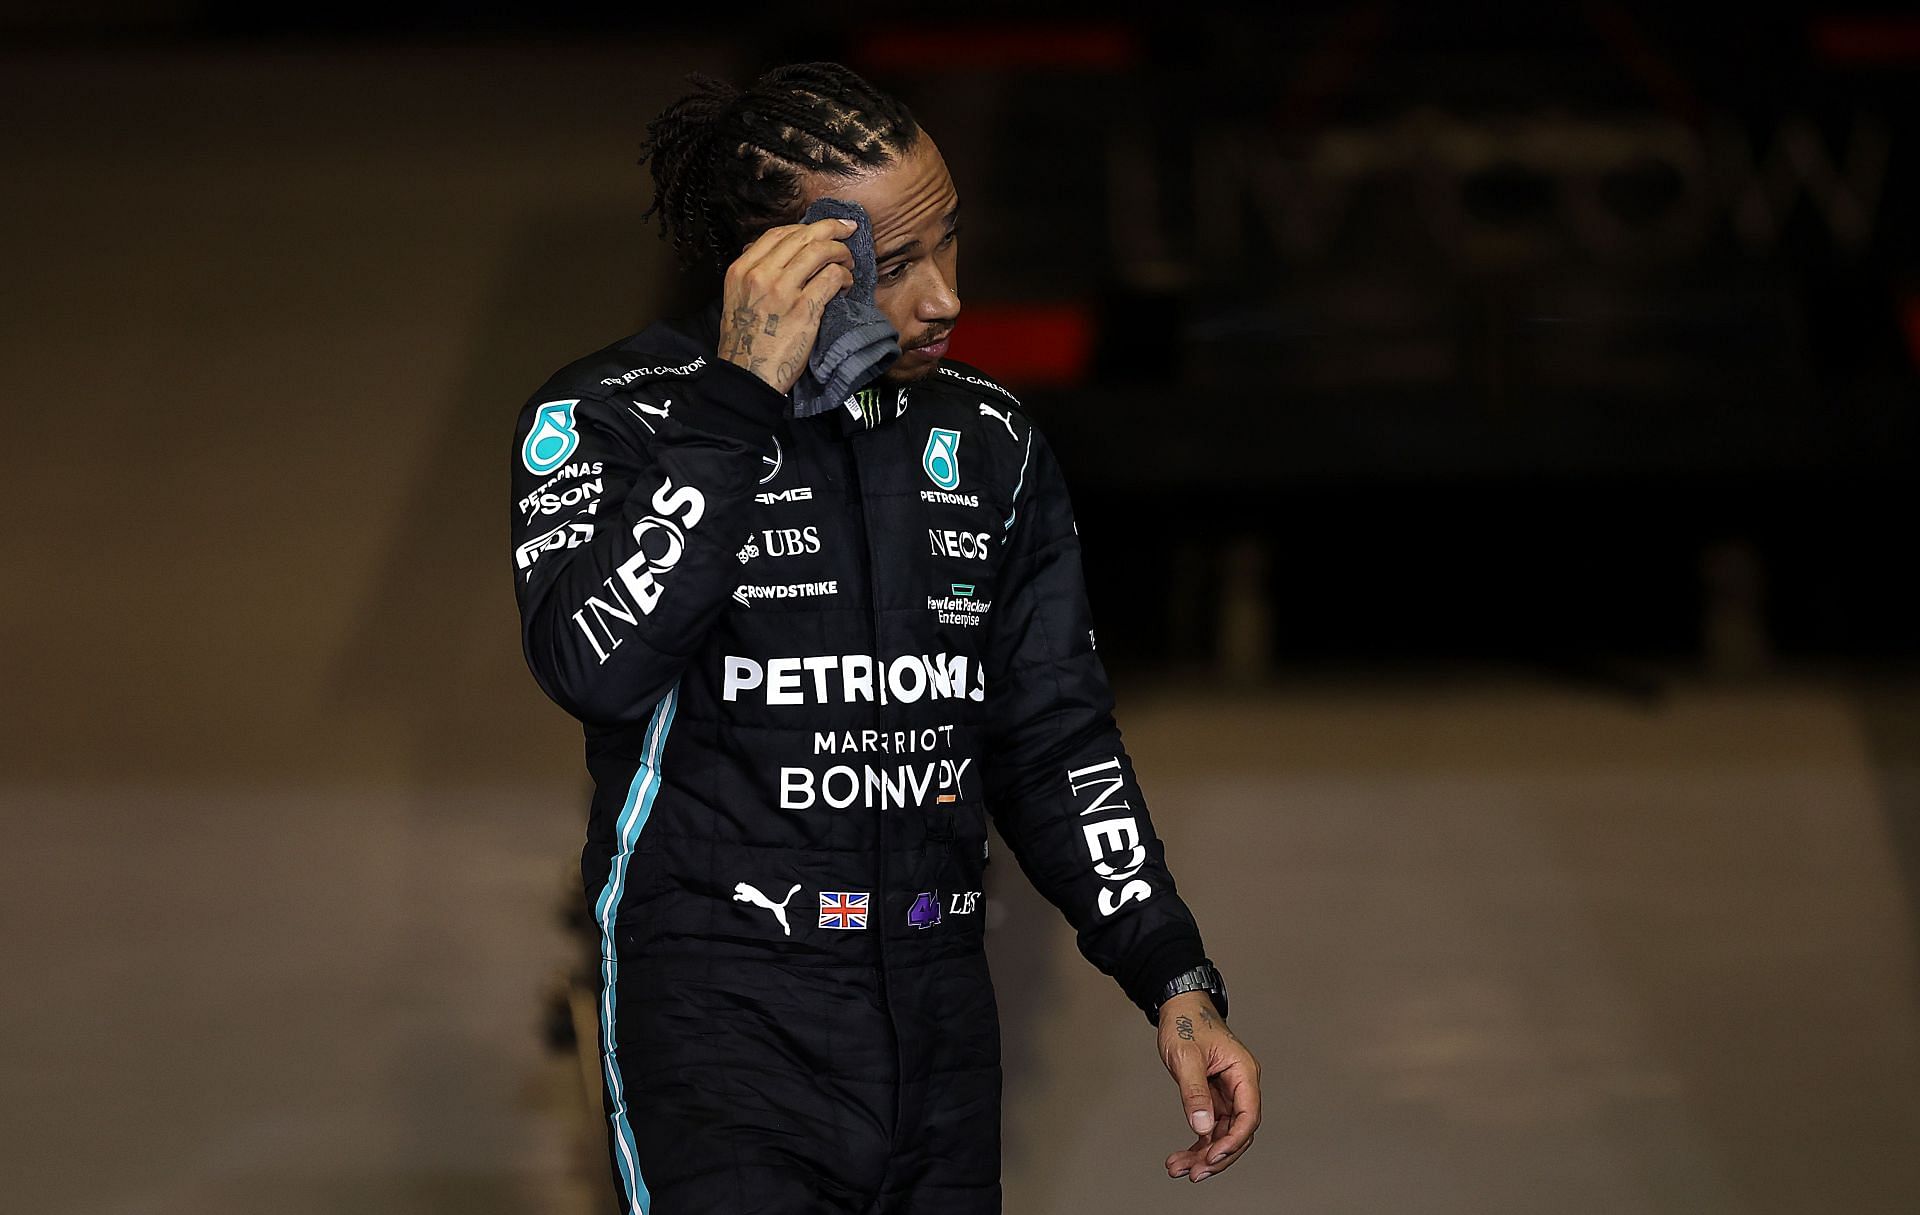 Lewis Hamilton might be in a sticky spot at Mercedes